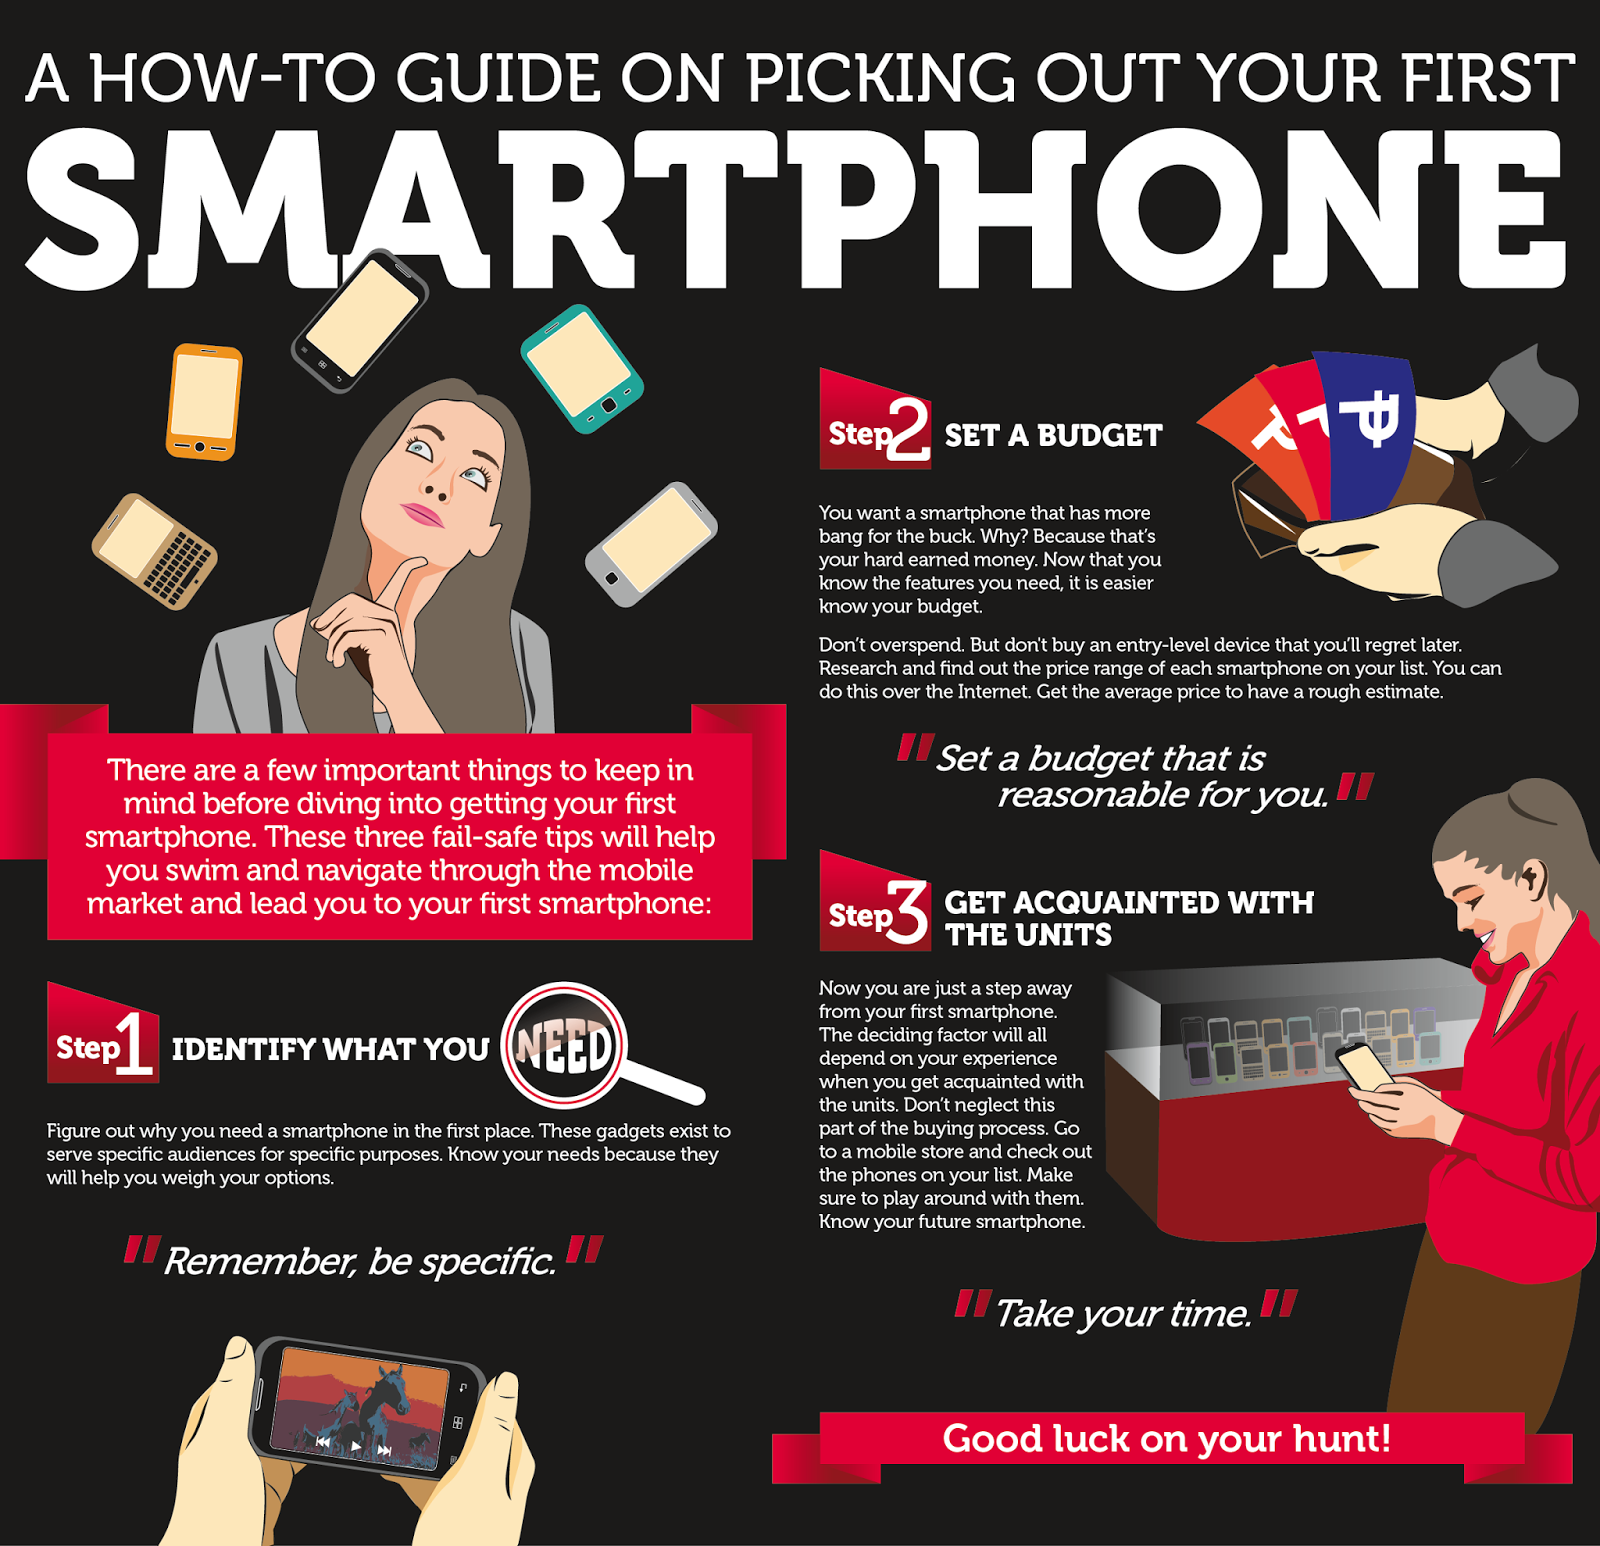 Lenovo Guide to Buy 1st Smartphone